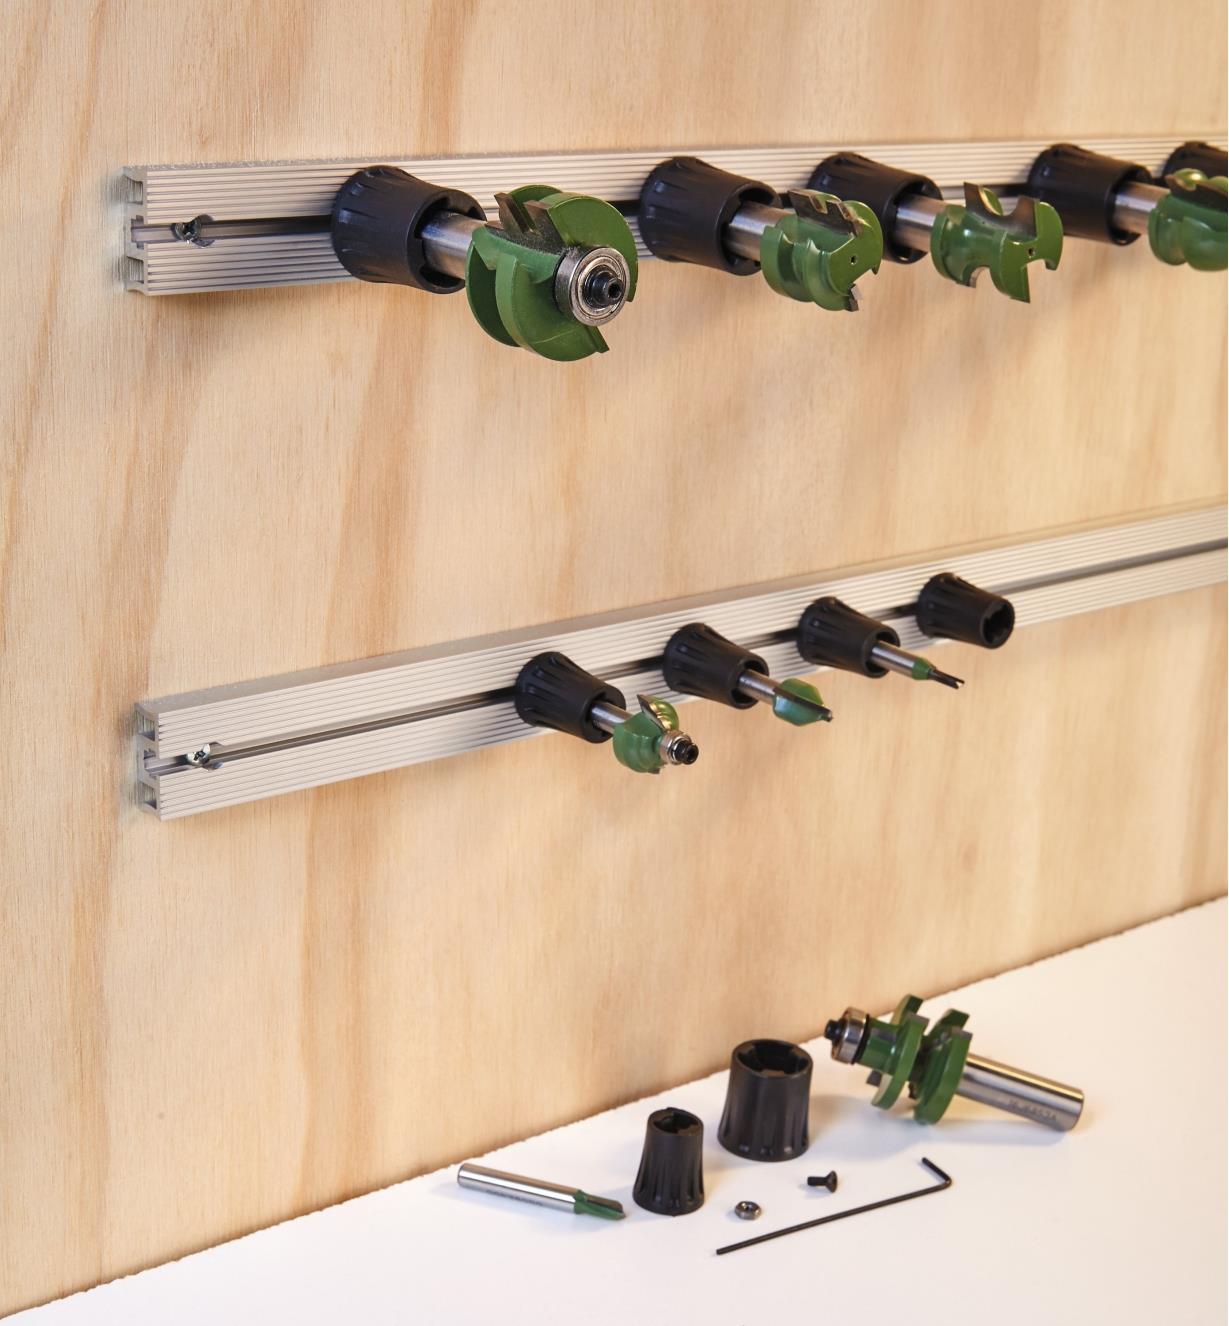 Two tracks including router bits in holders mounted horizontally on a wall